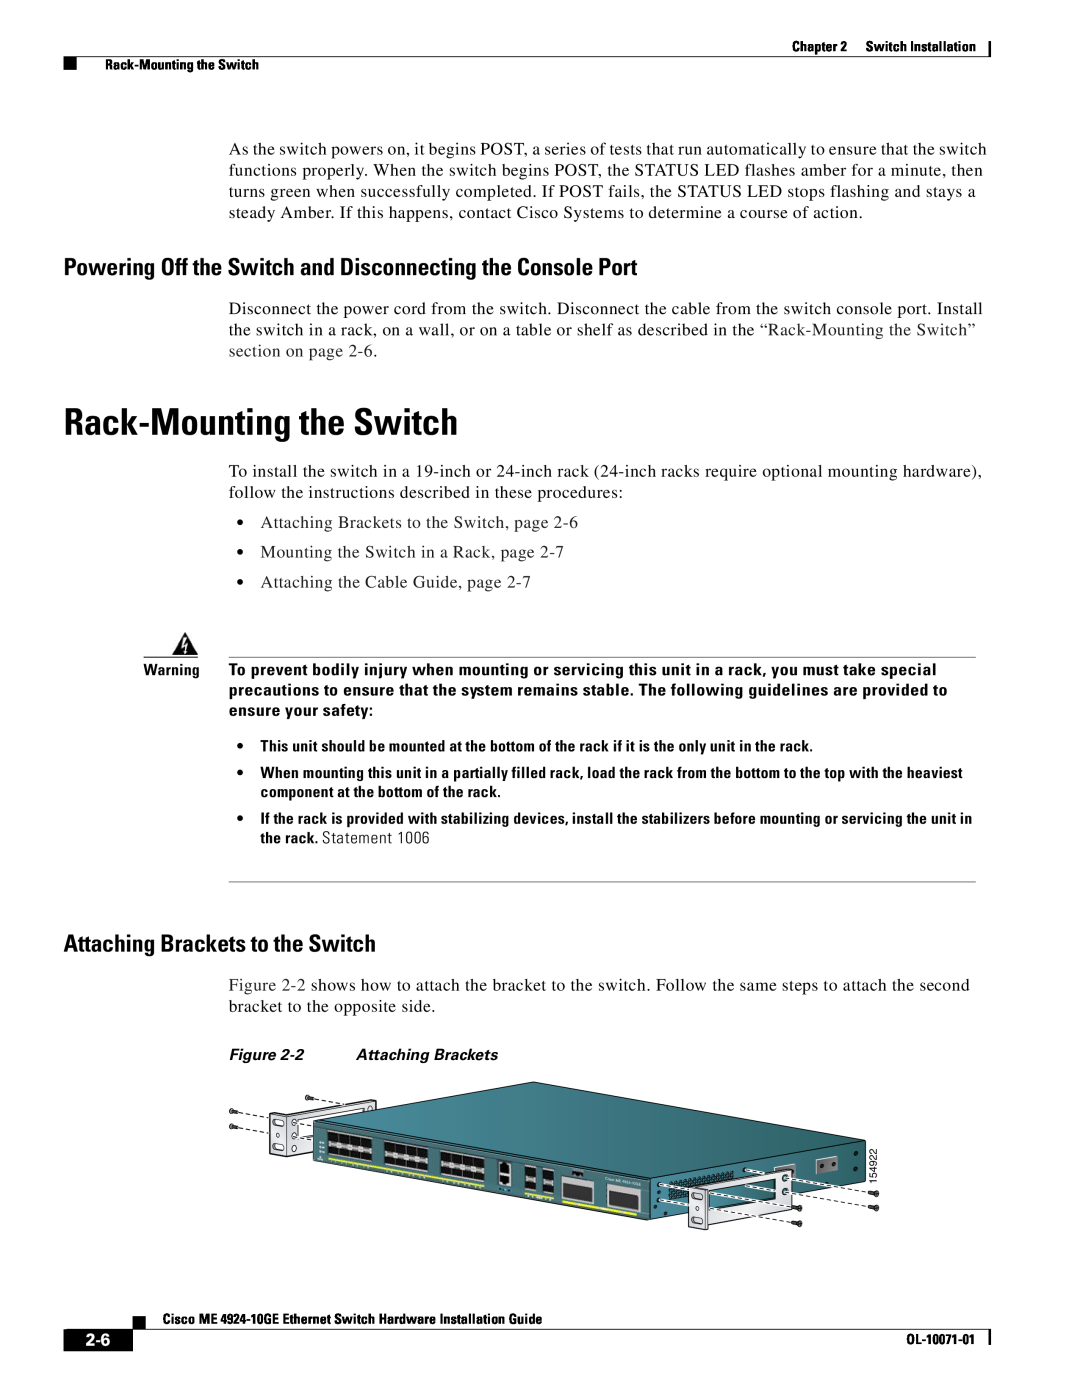 Cisco Systems ME 4924-10GE manual Rack-Mounting the Switch, Powering Off the Switch and Disconnecting the Console Port 